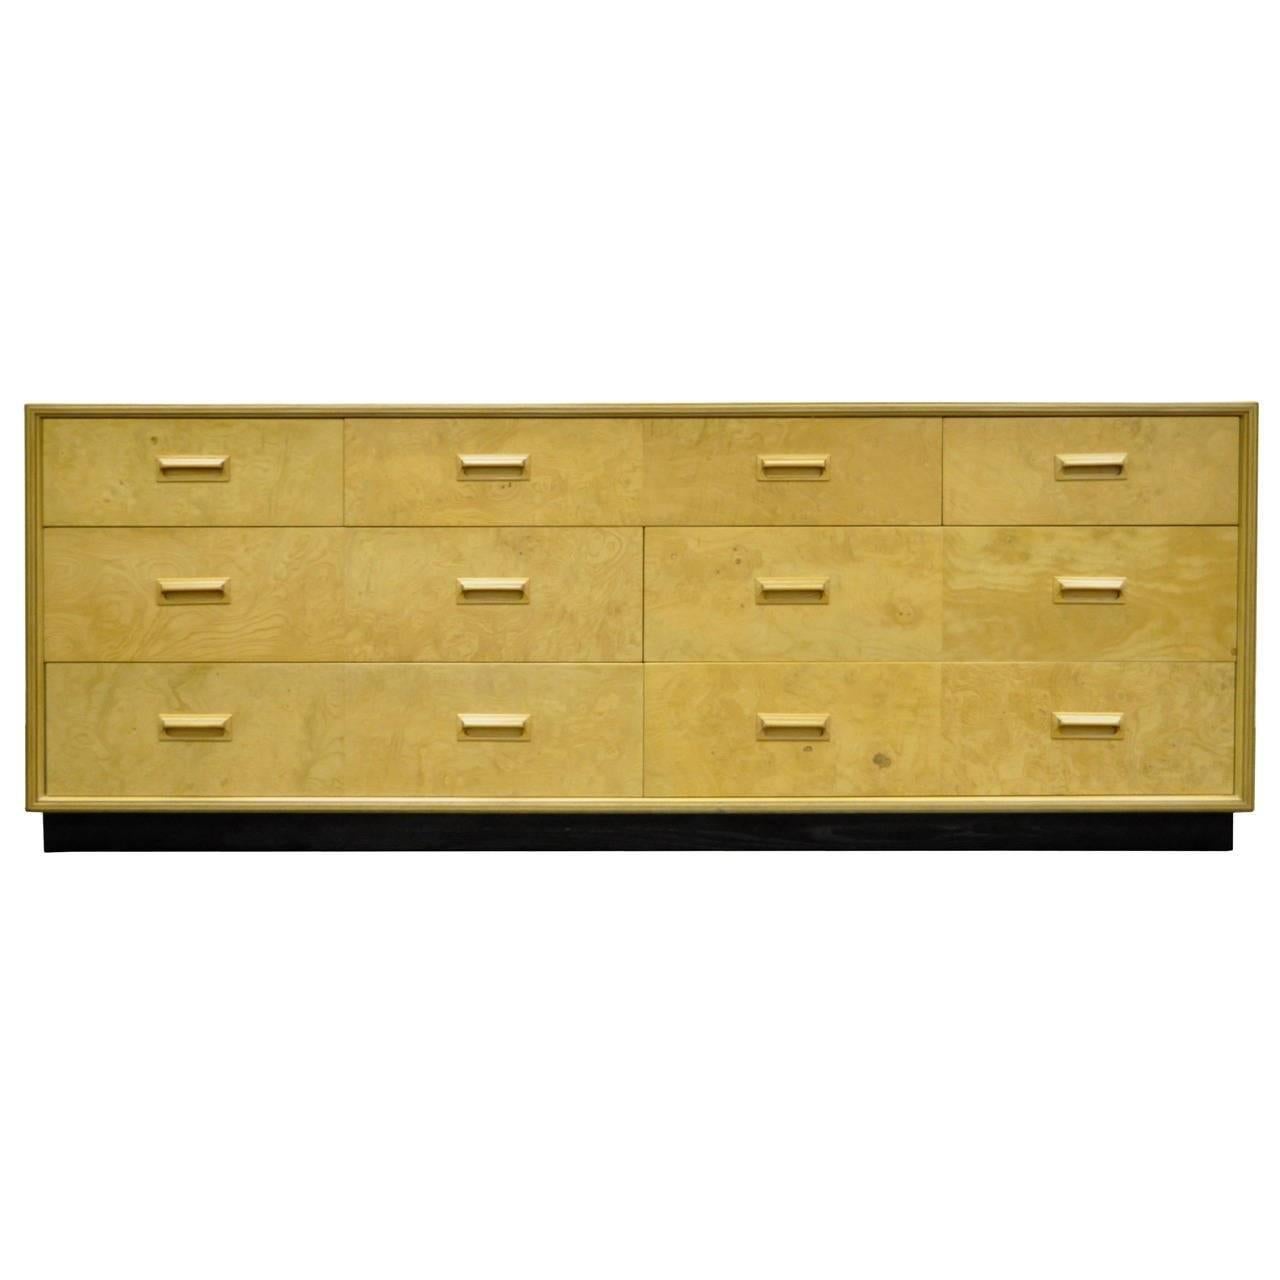 Vintage seven-drawer chest of drawers from the Henredon scene two collection. This unique burl wood dresser features a great modernist form, dovetailed drawer construction, inlaid sculpted wood pulls, ebonized plinth, and great overall form.